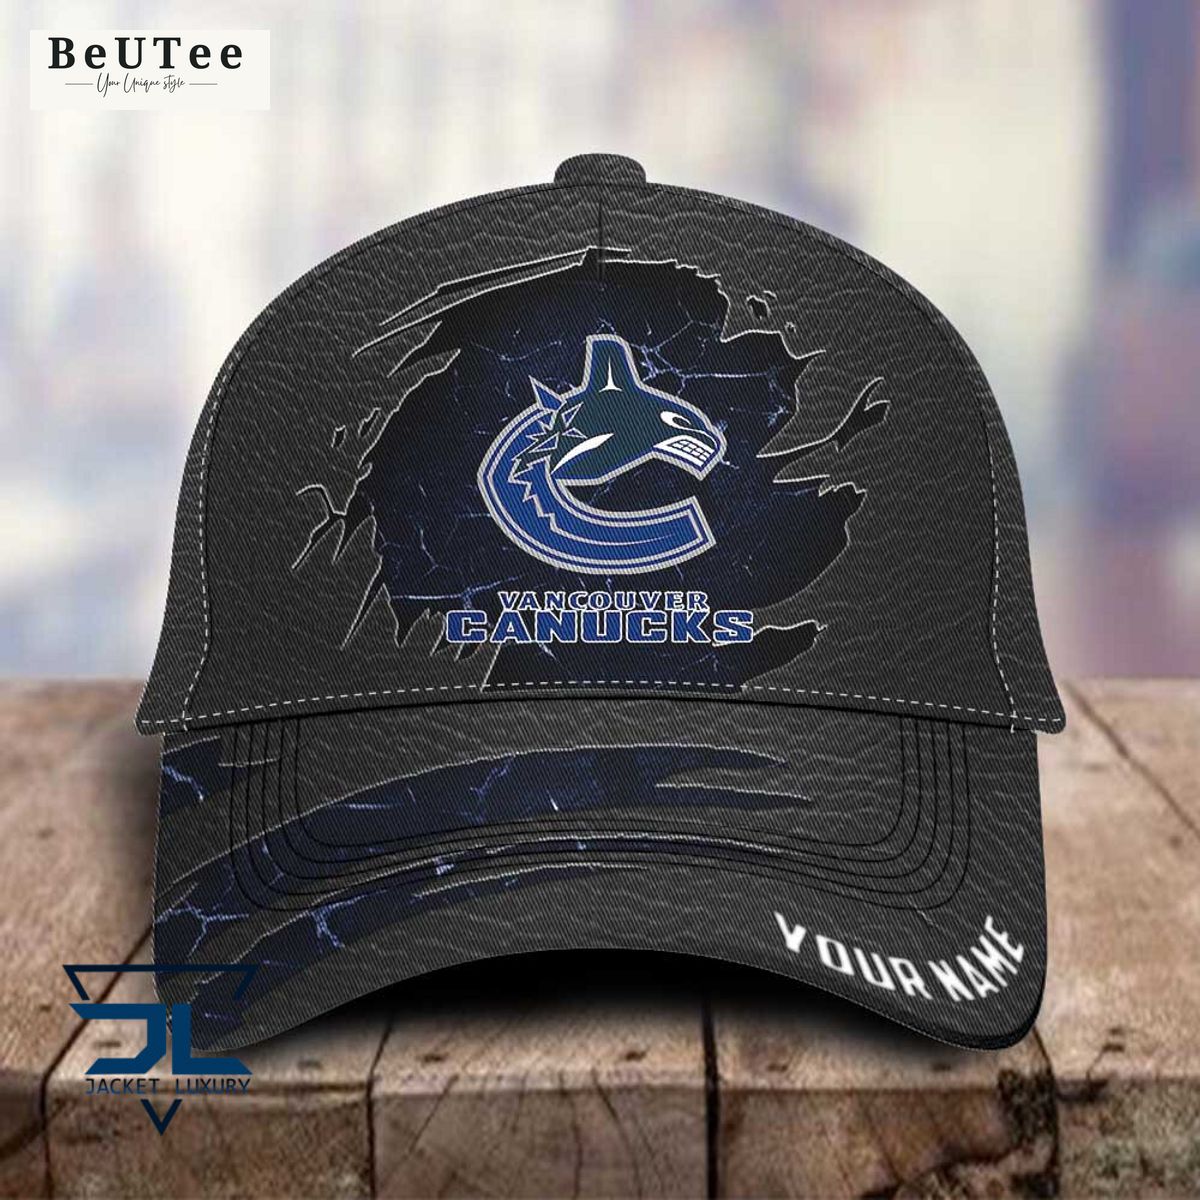 NHL Vancouver Canucks Customized Hockey Classic Cap You look handsome bro